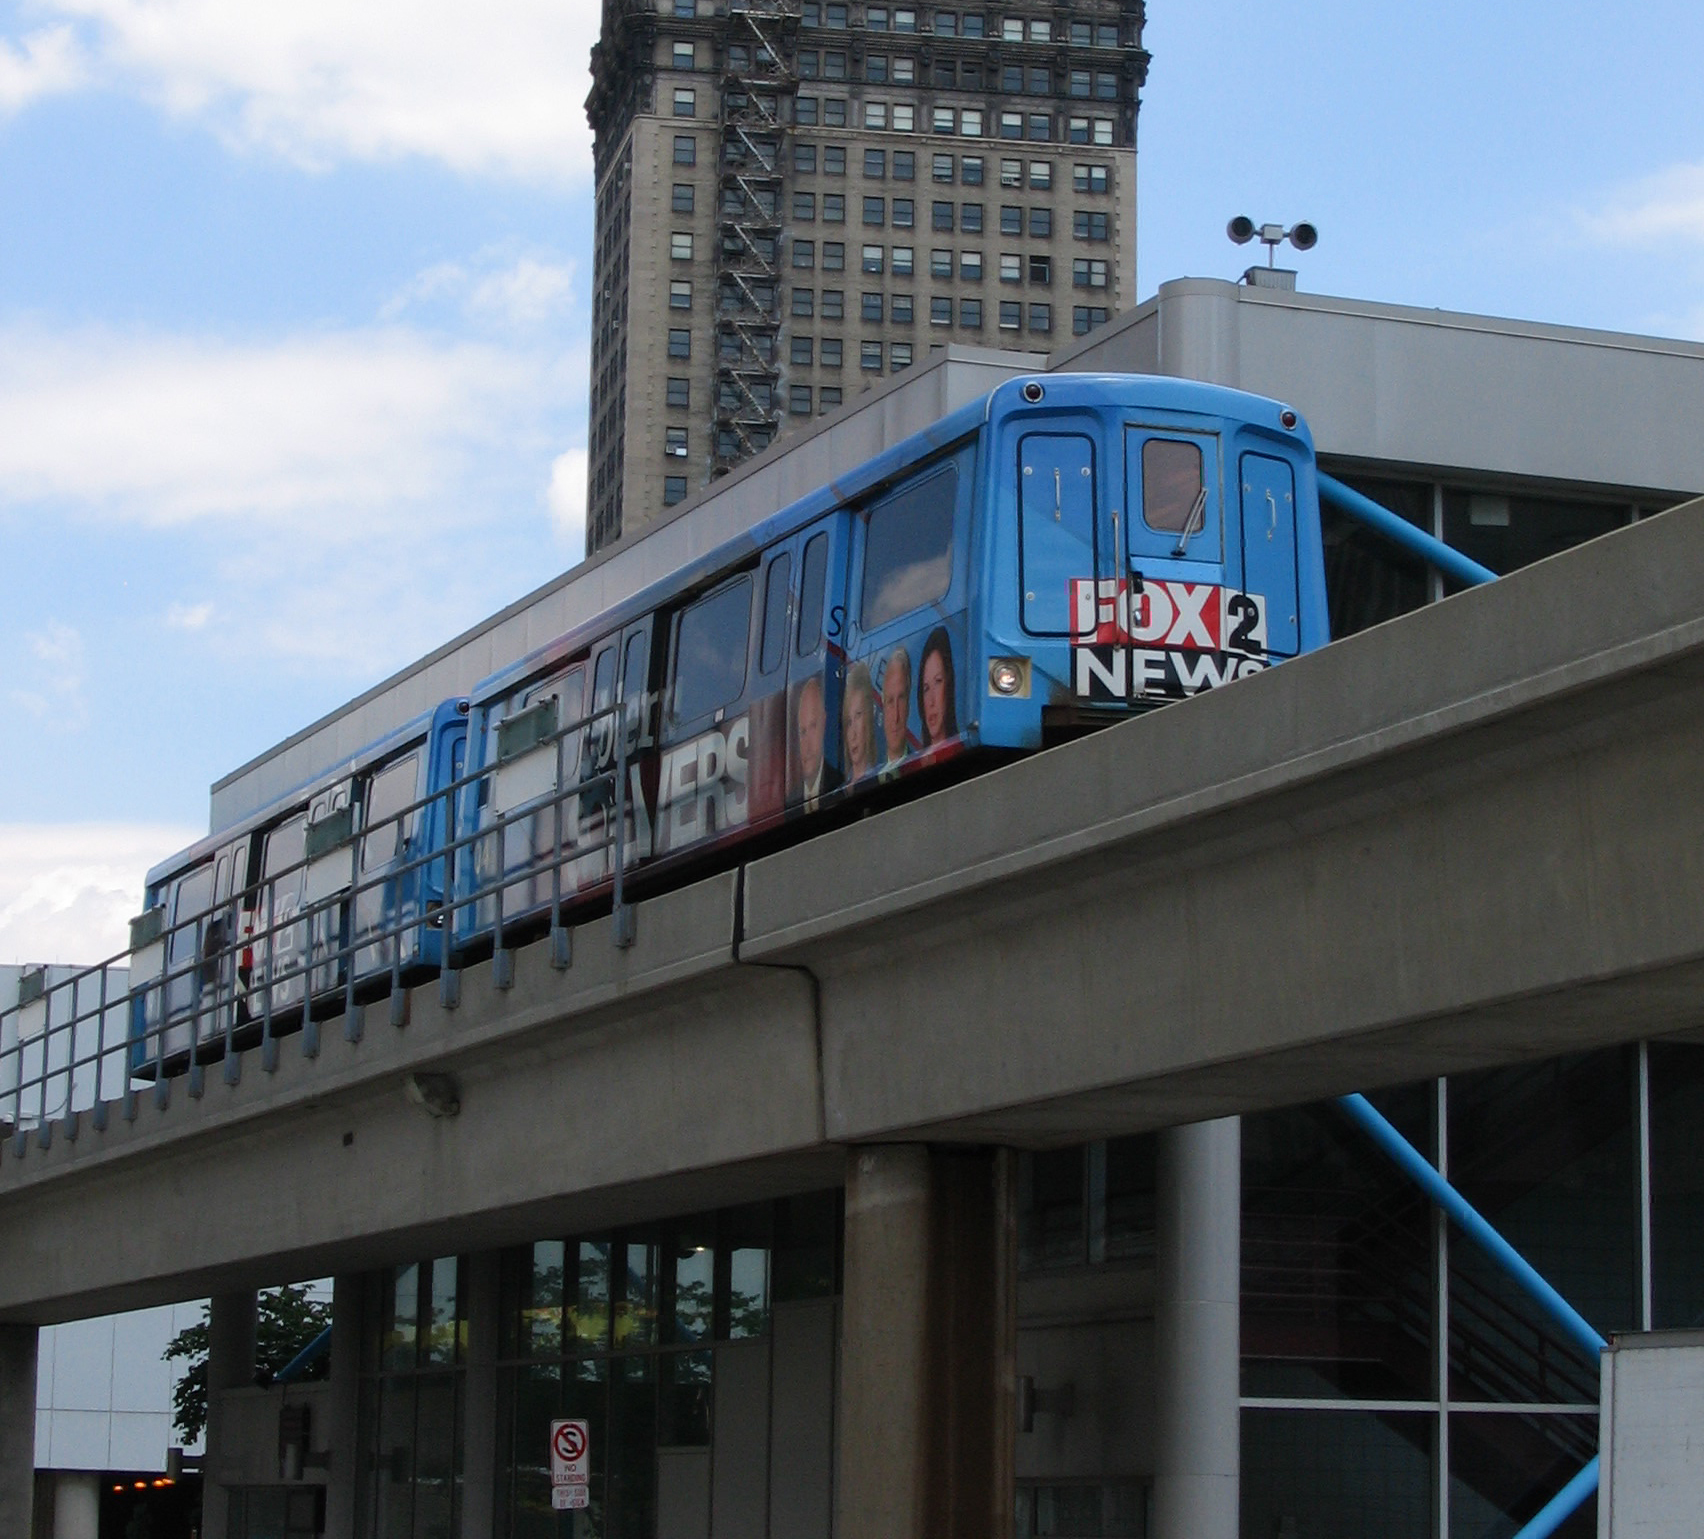 Detroit People Mover